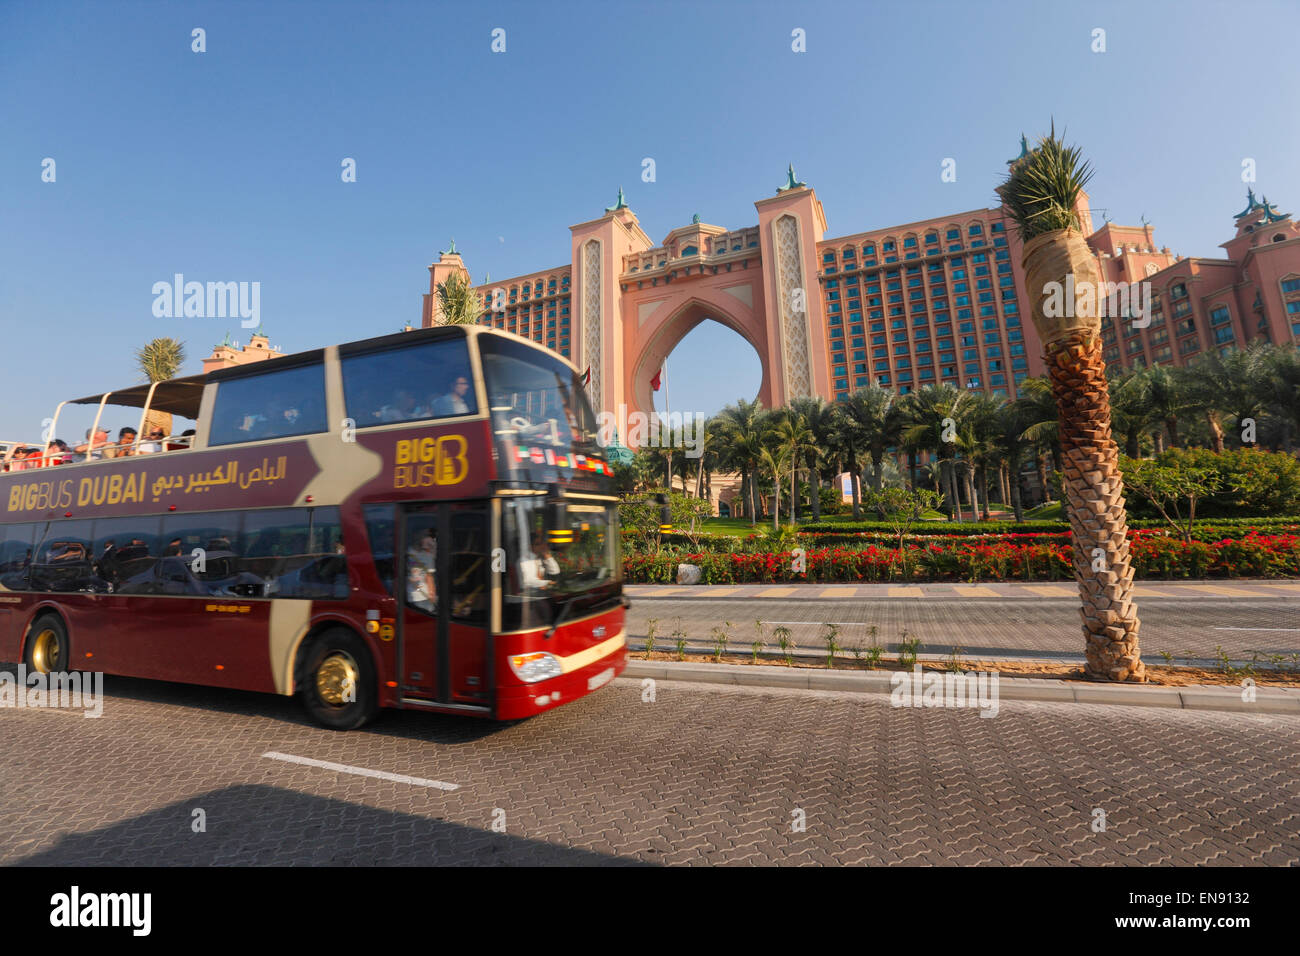 Dubai, the Atlantis hotel and city sightseeing bus in front Stock Photo